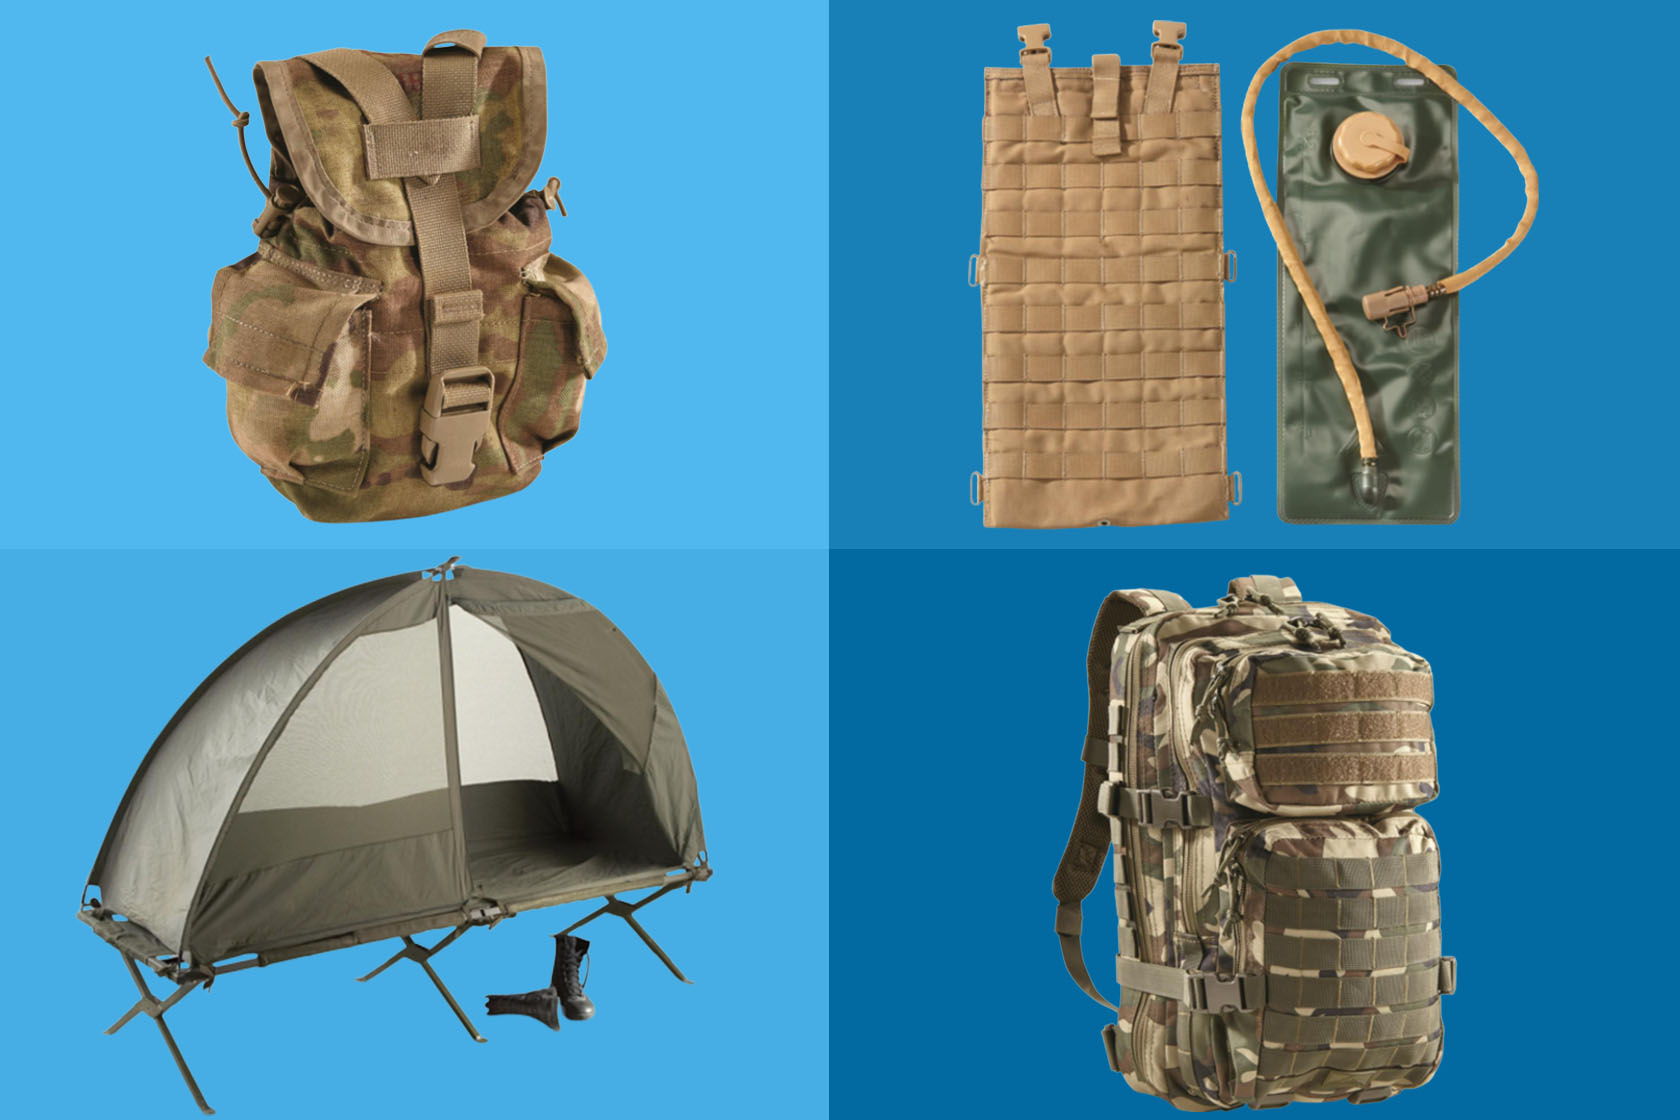 Military surplus gear: is it good for hiking?